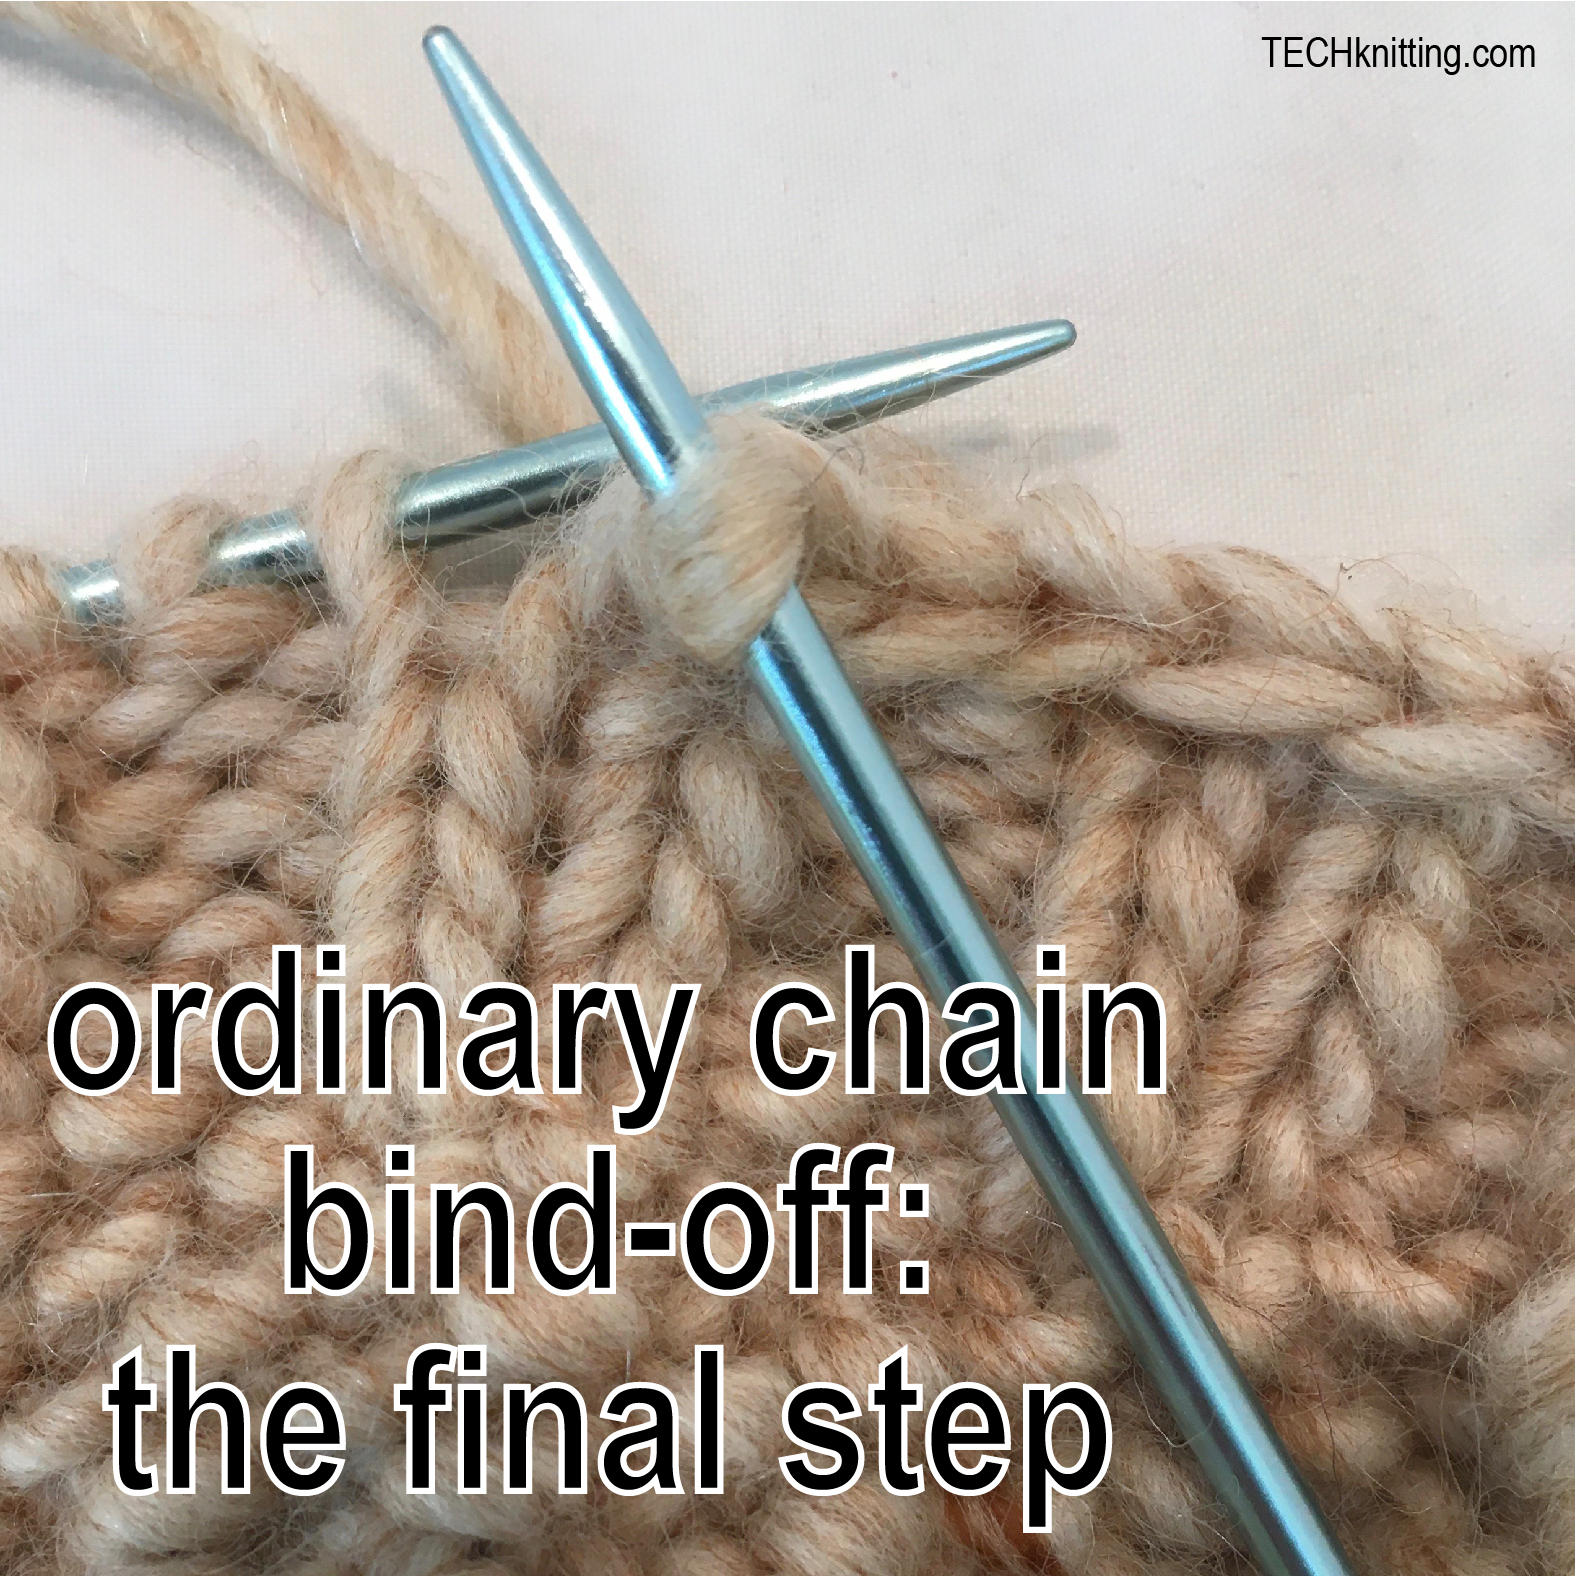 TECHknitting: Skimming in ends with a knitpicker